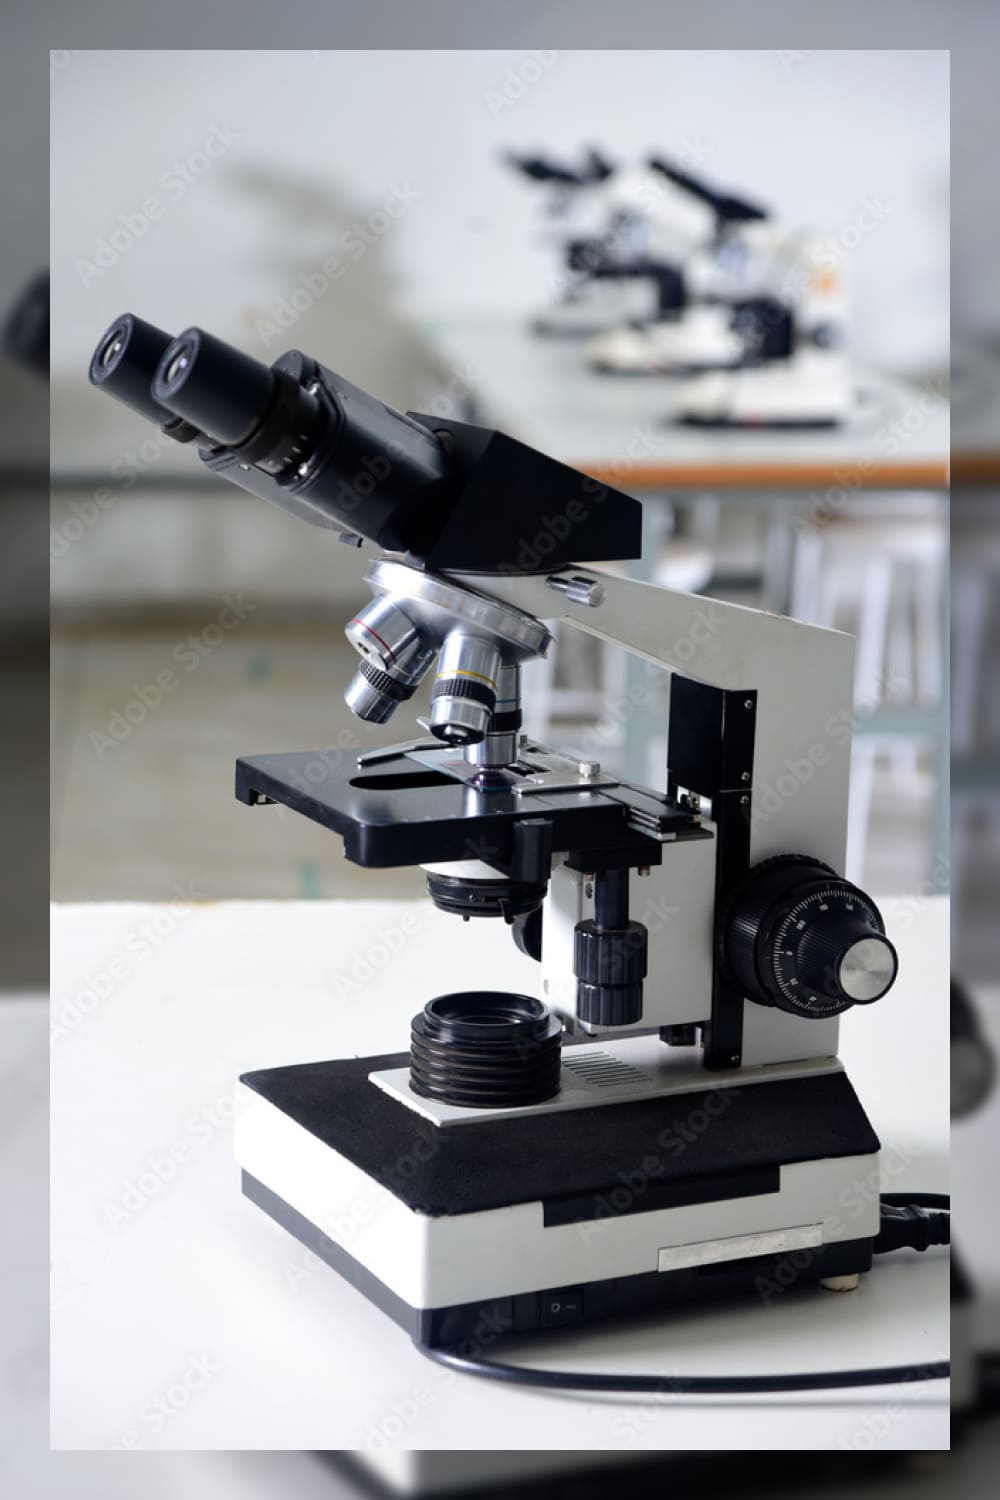 Microscope is an optical instrument capable of enlarging images of very small objects analyzing diseases clinical health research laboratory.